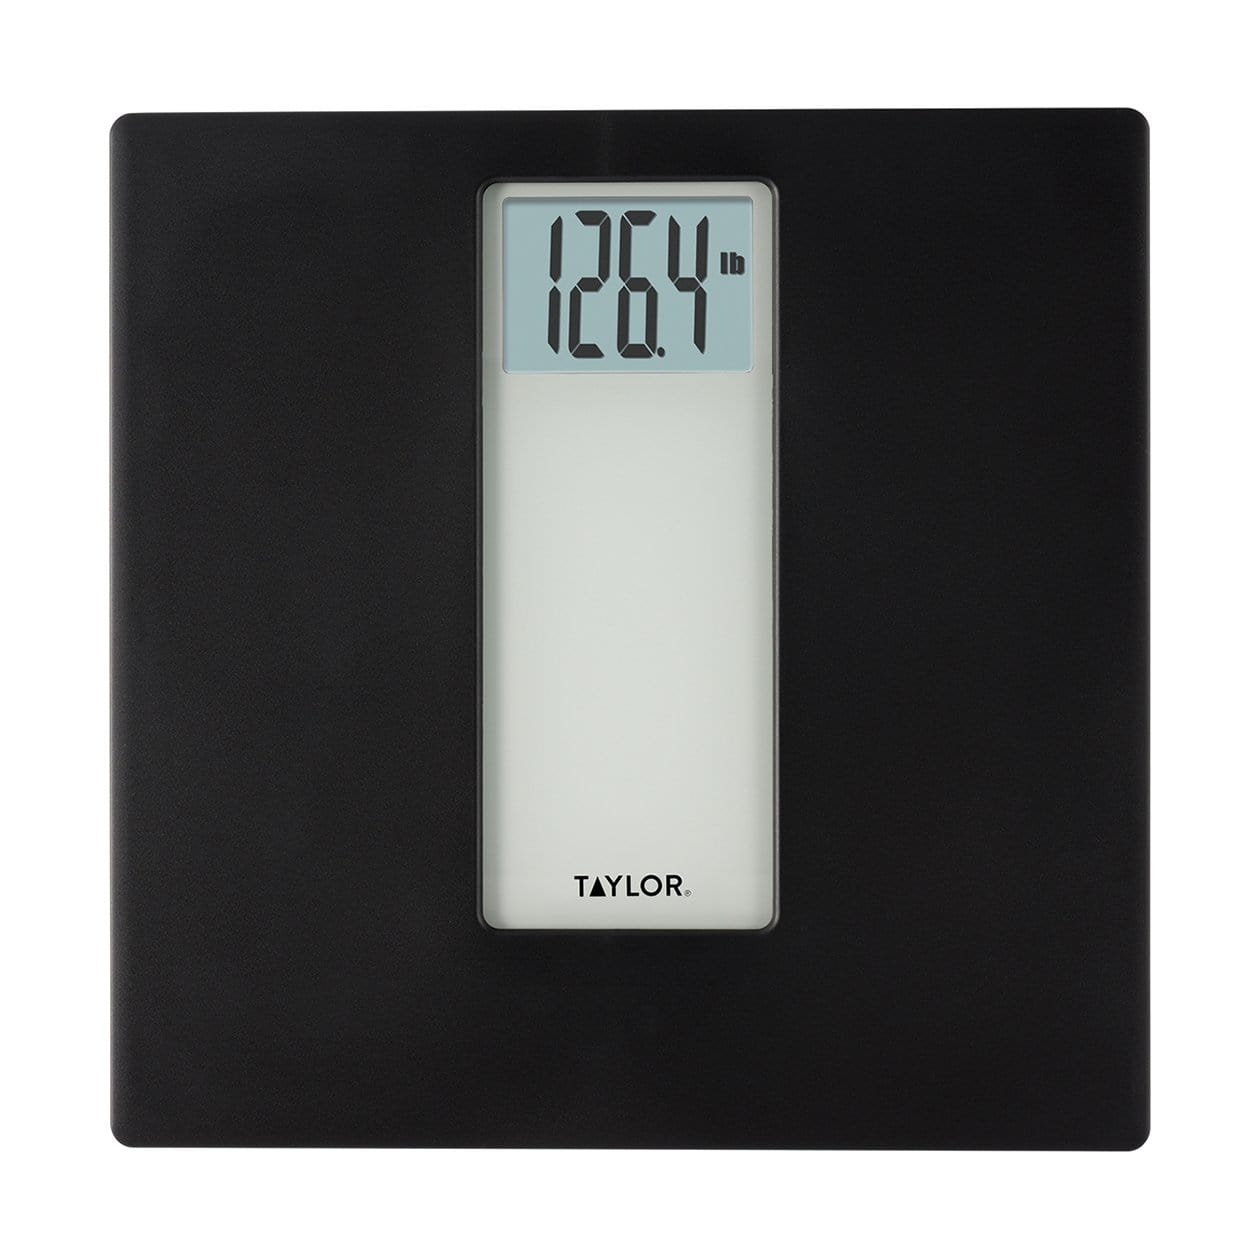 Taylor White Digital Bathroom Scale 5302876 – Good's Store Online